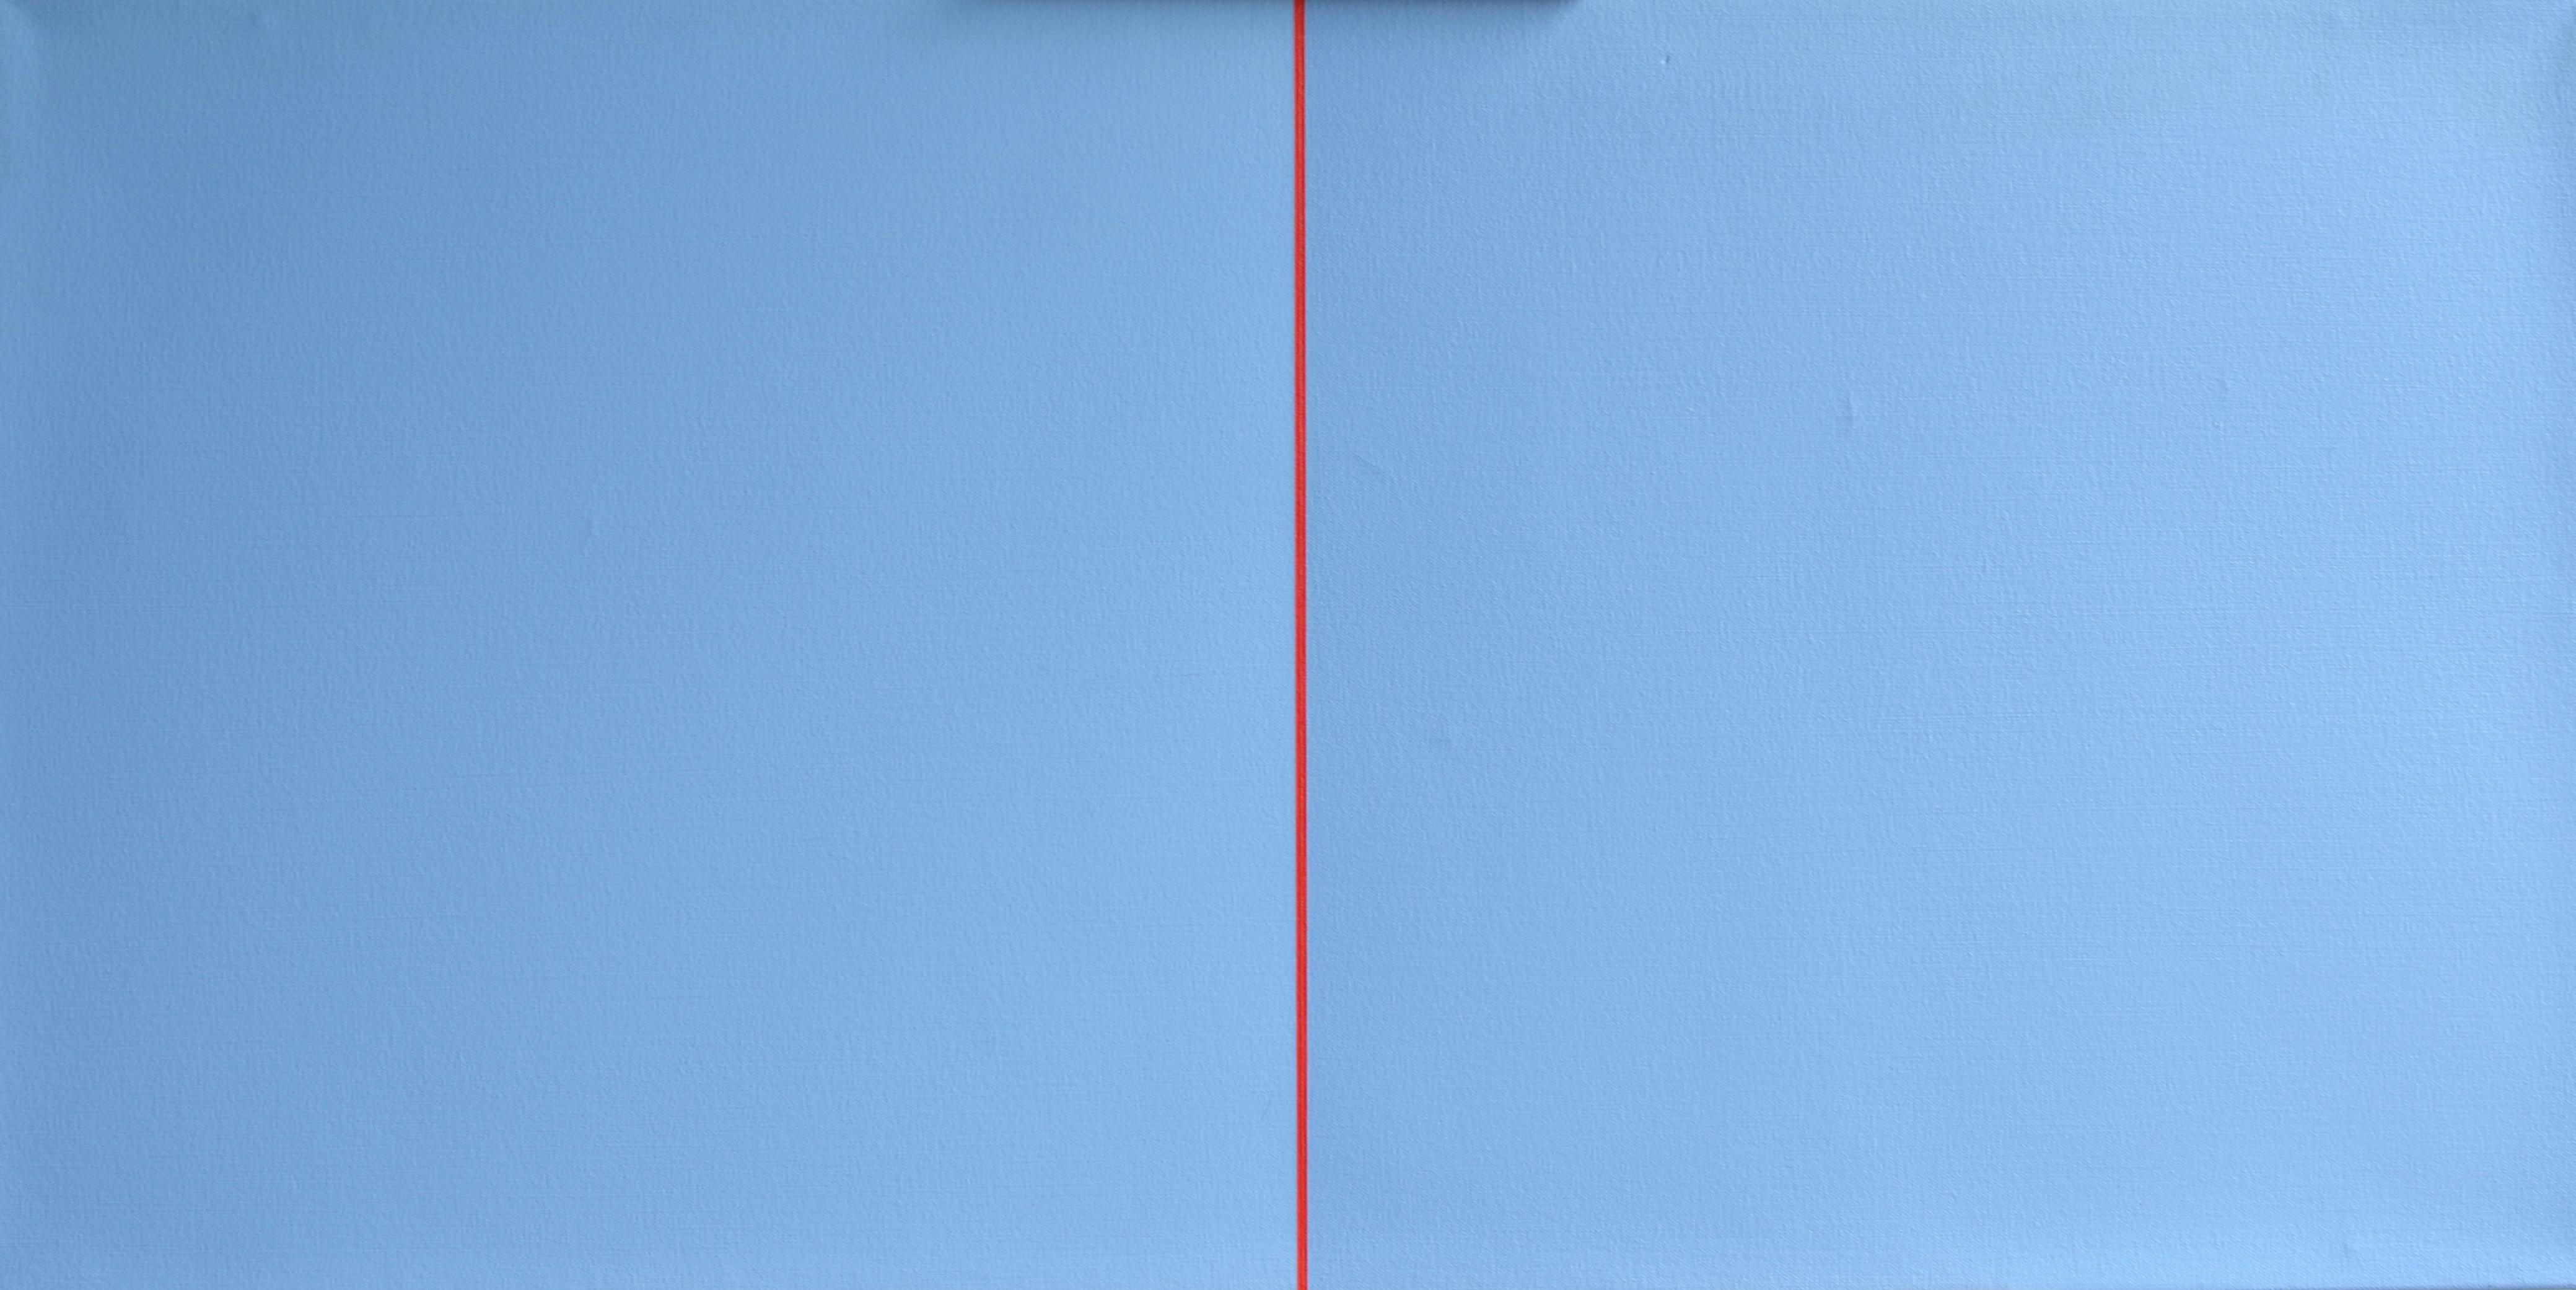 Luke Frost is the sixth artist to emerge from the current Tate St Ives Artist Residency at Porthmeor Studios, St Ives, England. An abstract painter, his works explore the pictorial possibilities of colour. Built up in layers to a refined, smooth